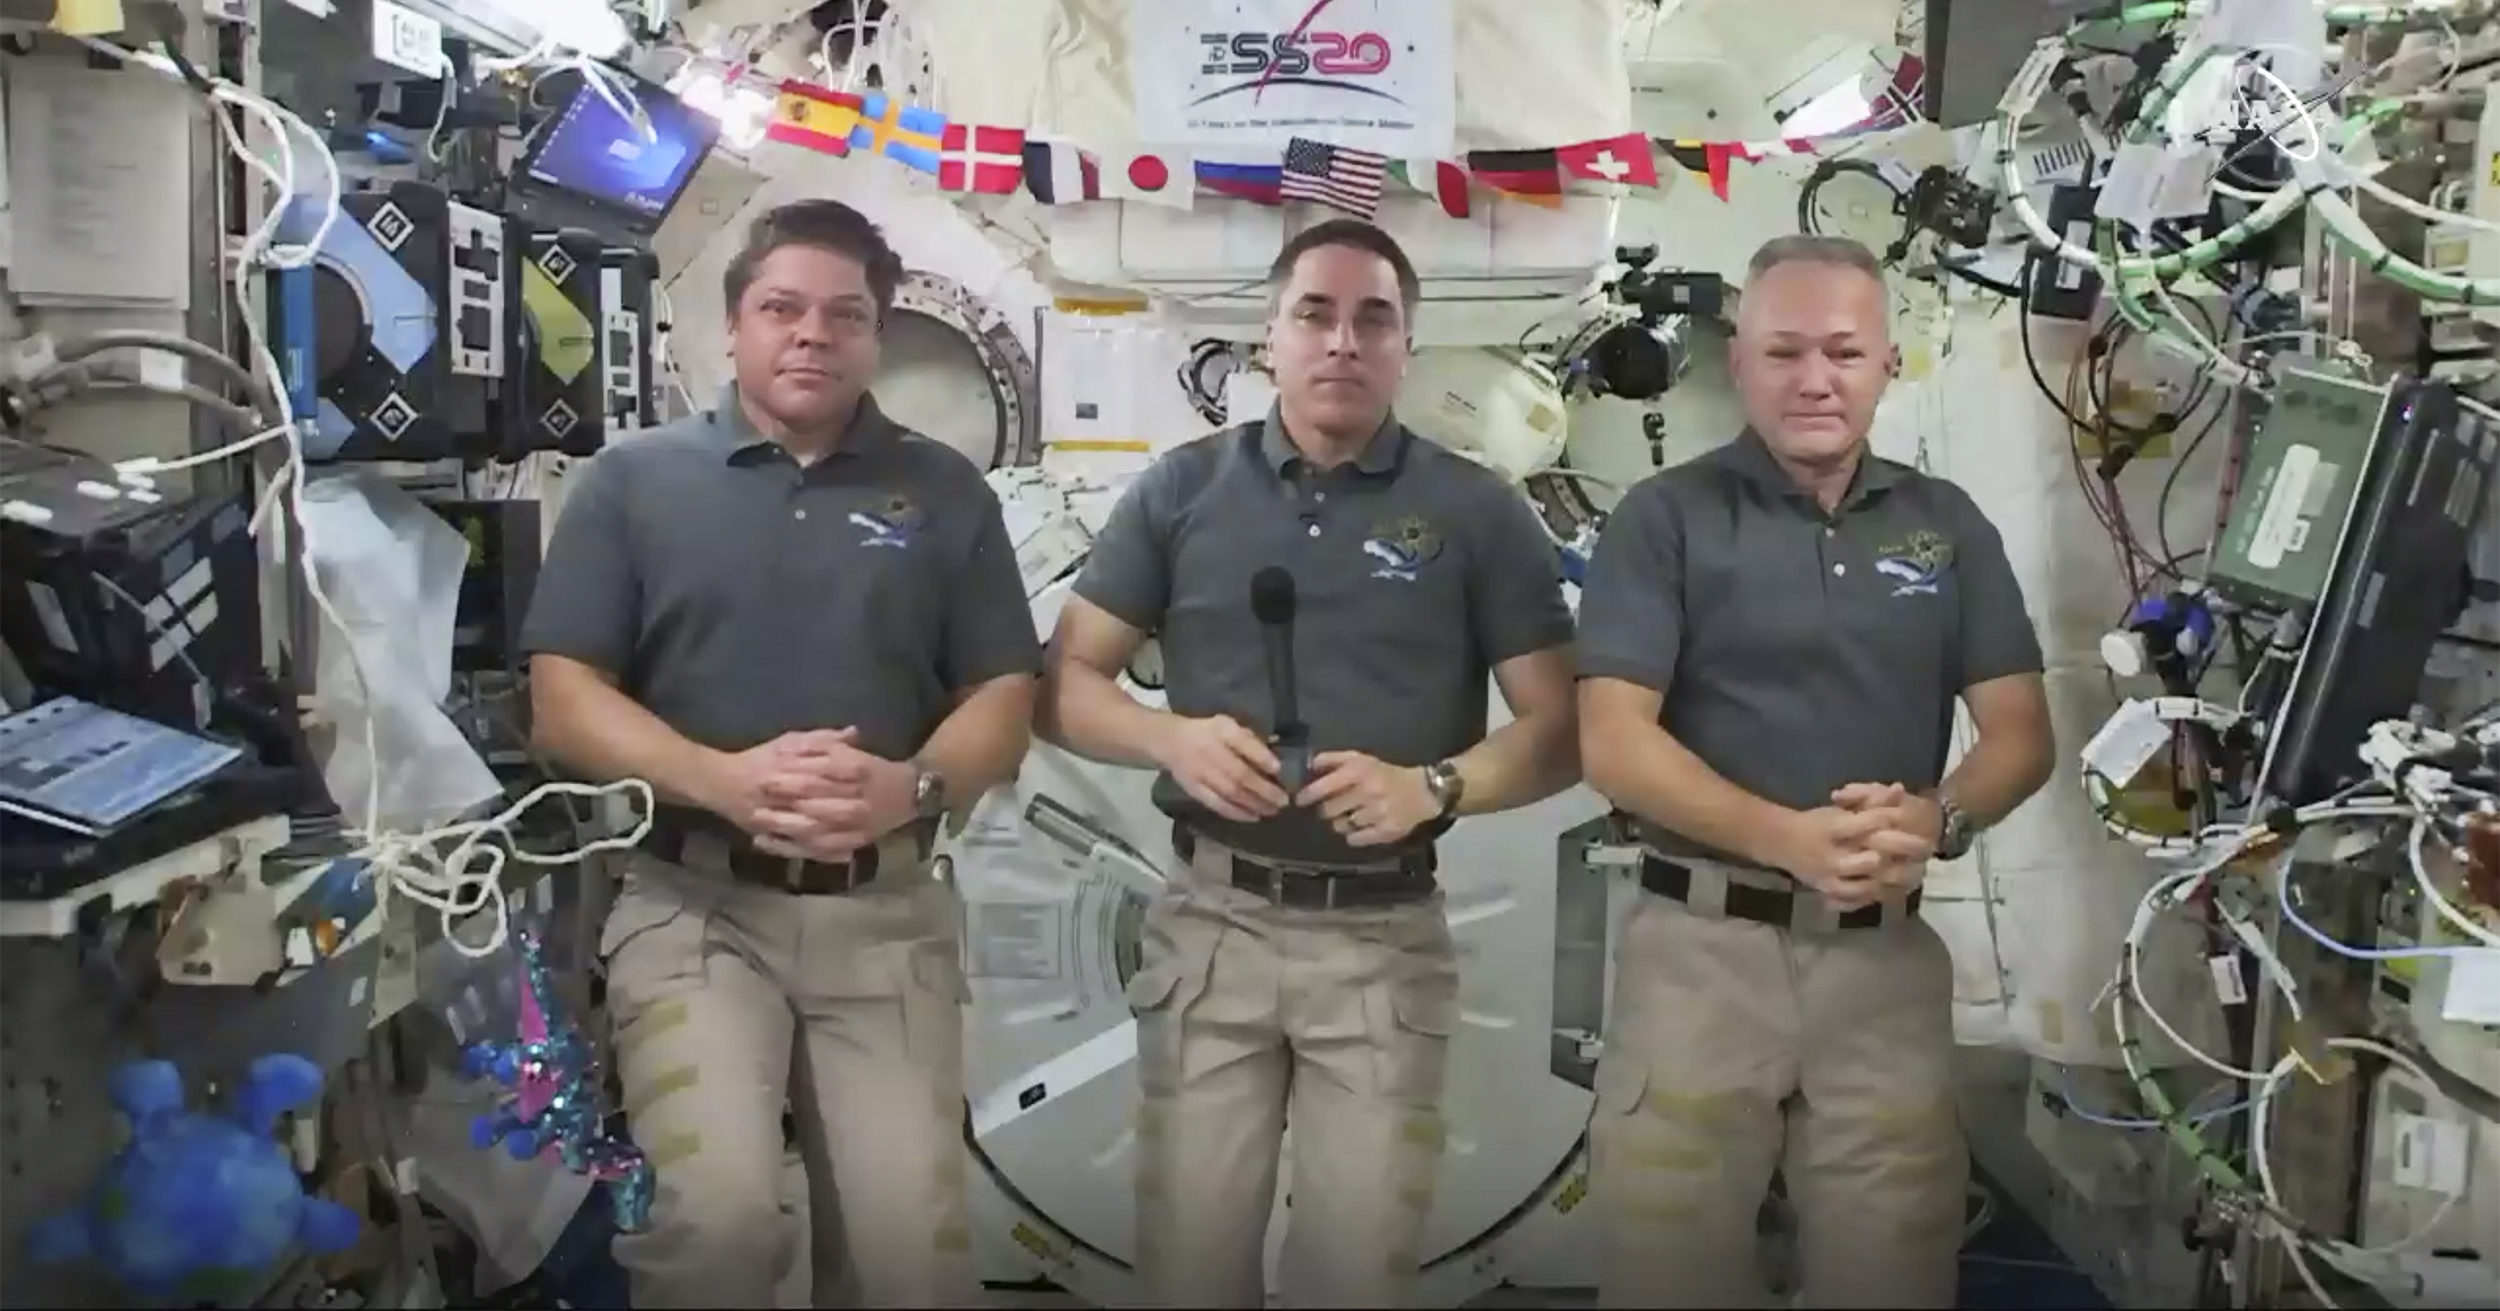 This photo provided by NASA shows, from left, astronauts Bob Behnken, Chris Cassidy and Doug Hurley during an interview on the International Space Station on July 31, 2020. Behnken and Hurley are scheduled to leave the International Space Station in a SpaceX capsule on Aug. 1 and splashdown off the coast of Florida on Aug. 2.